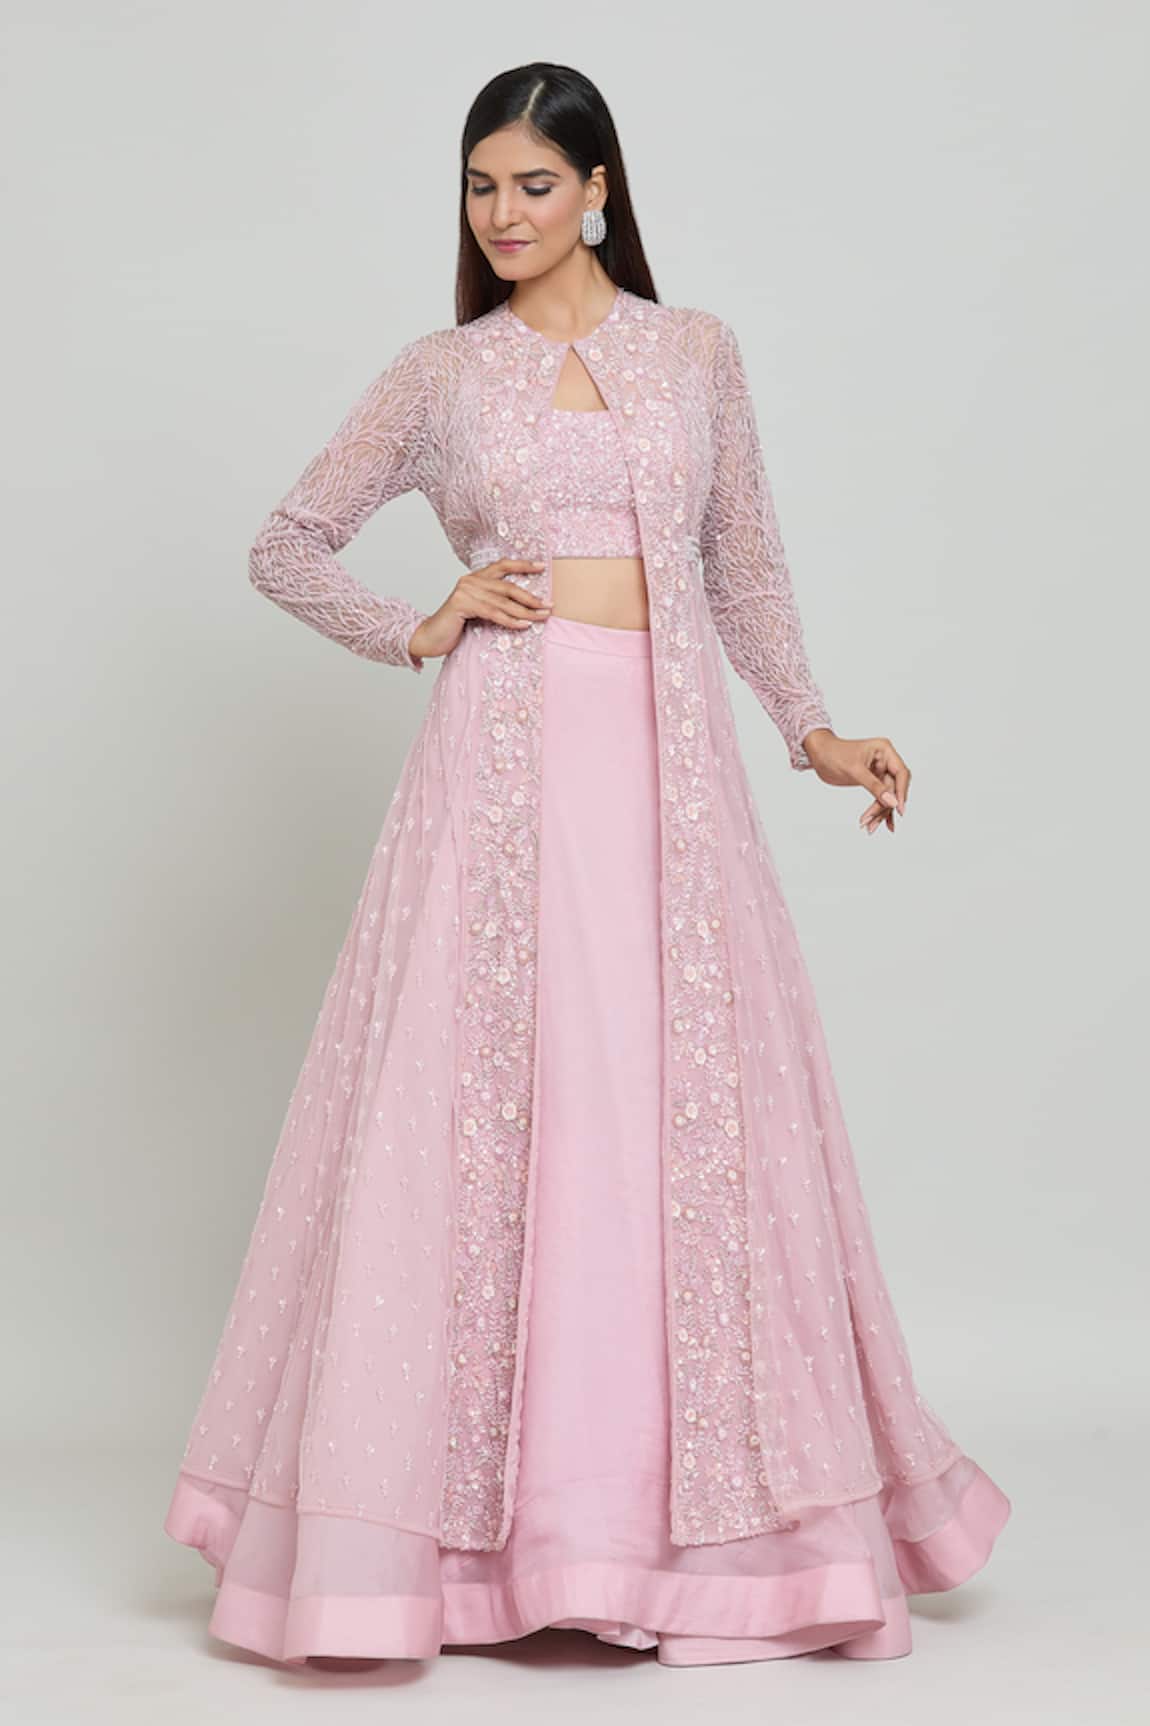 COUTURE BY NIHARIKA Floral Bead & Cutdana Embroidered Cape Skirt Set